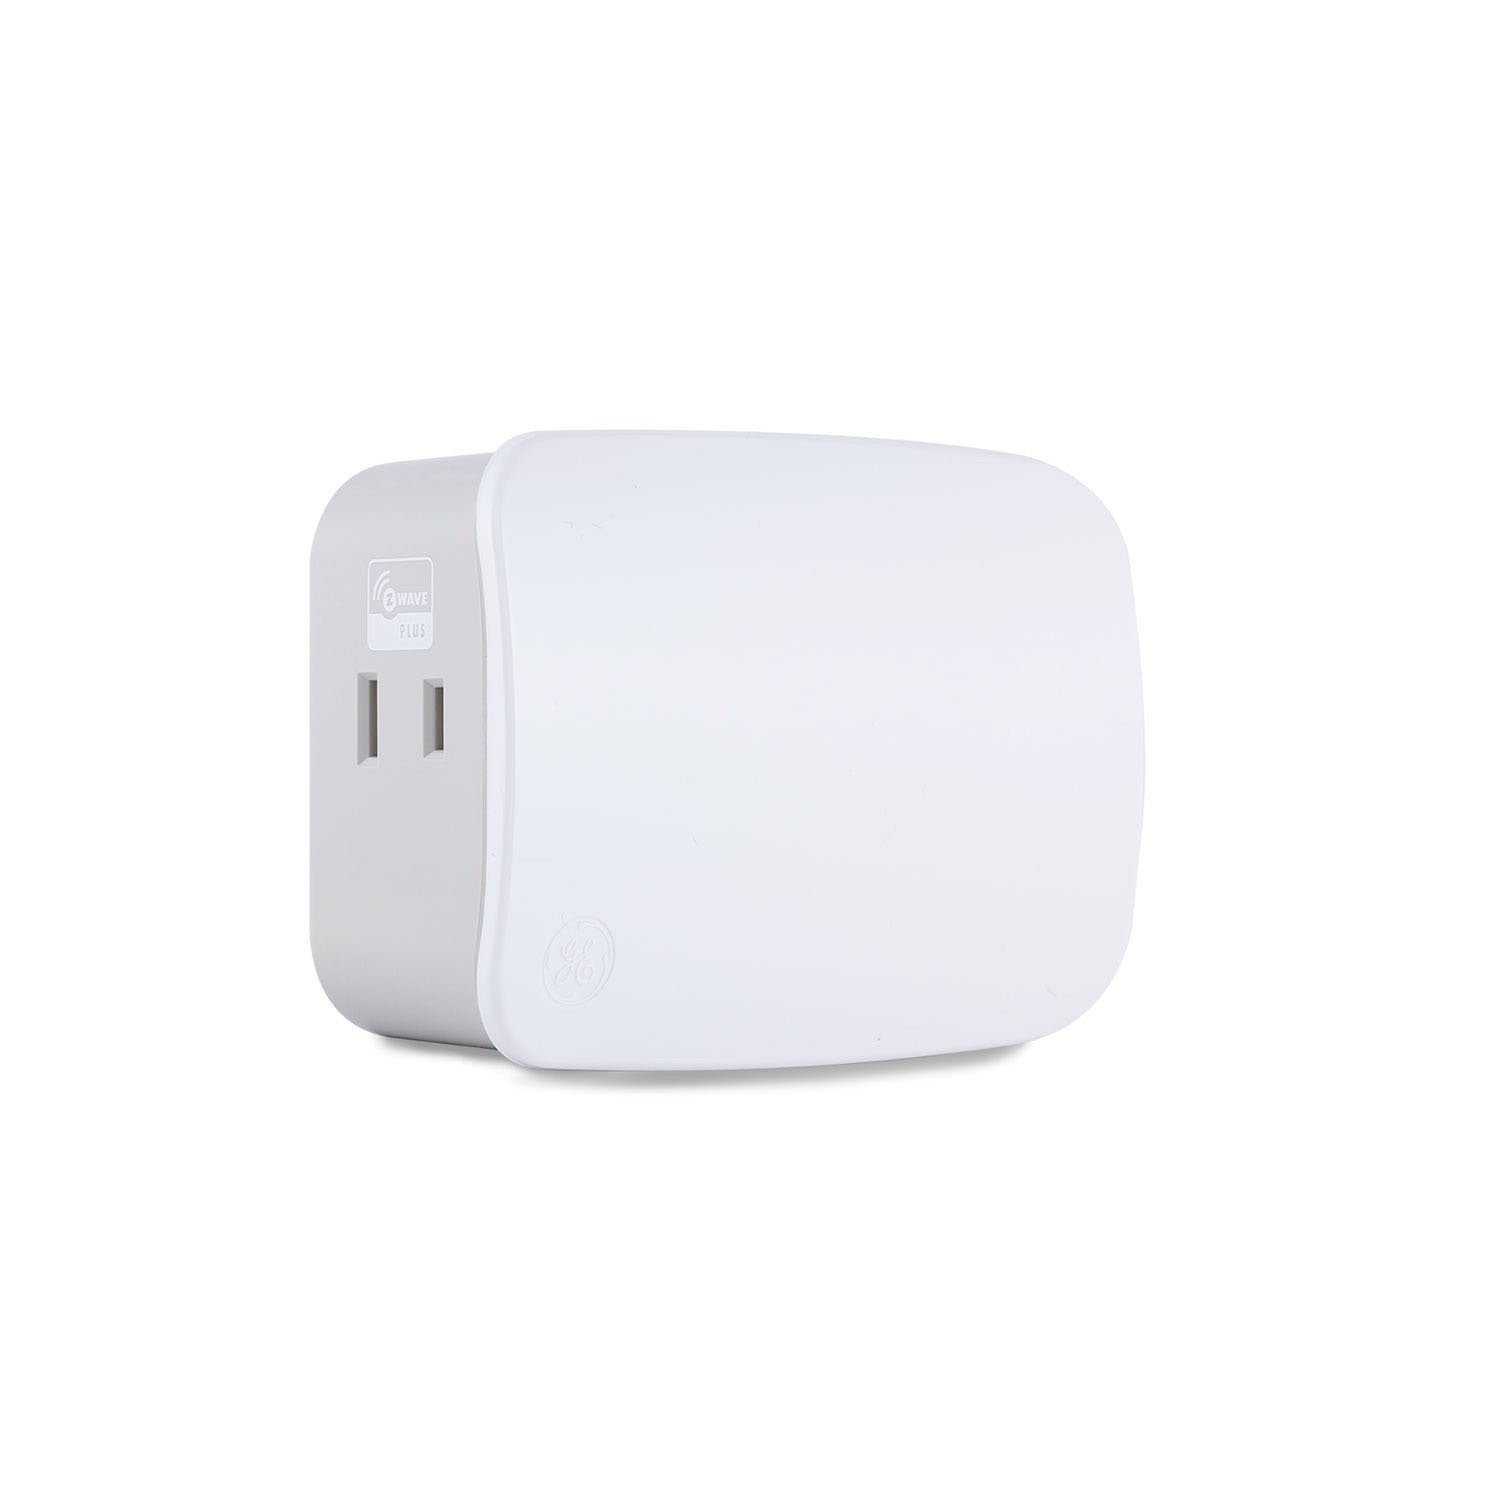 GE Plug-In Dimmer (Two Outlet) (for Works with Ring Alarm Security System) - White